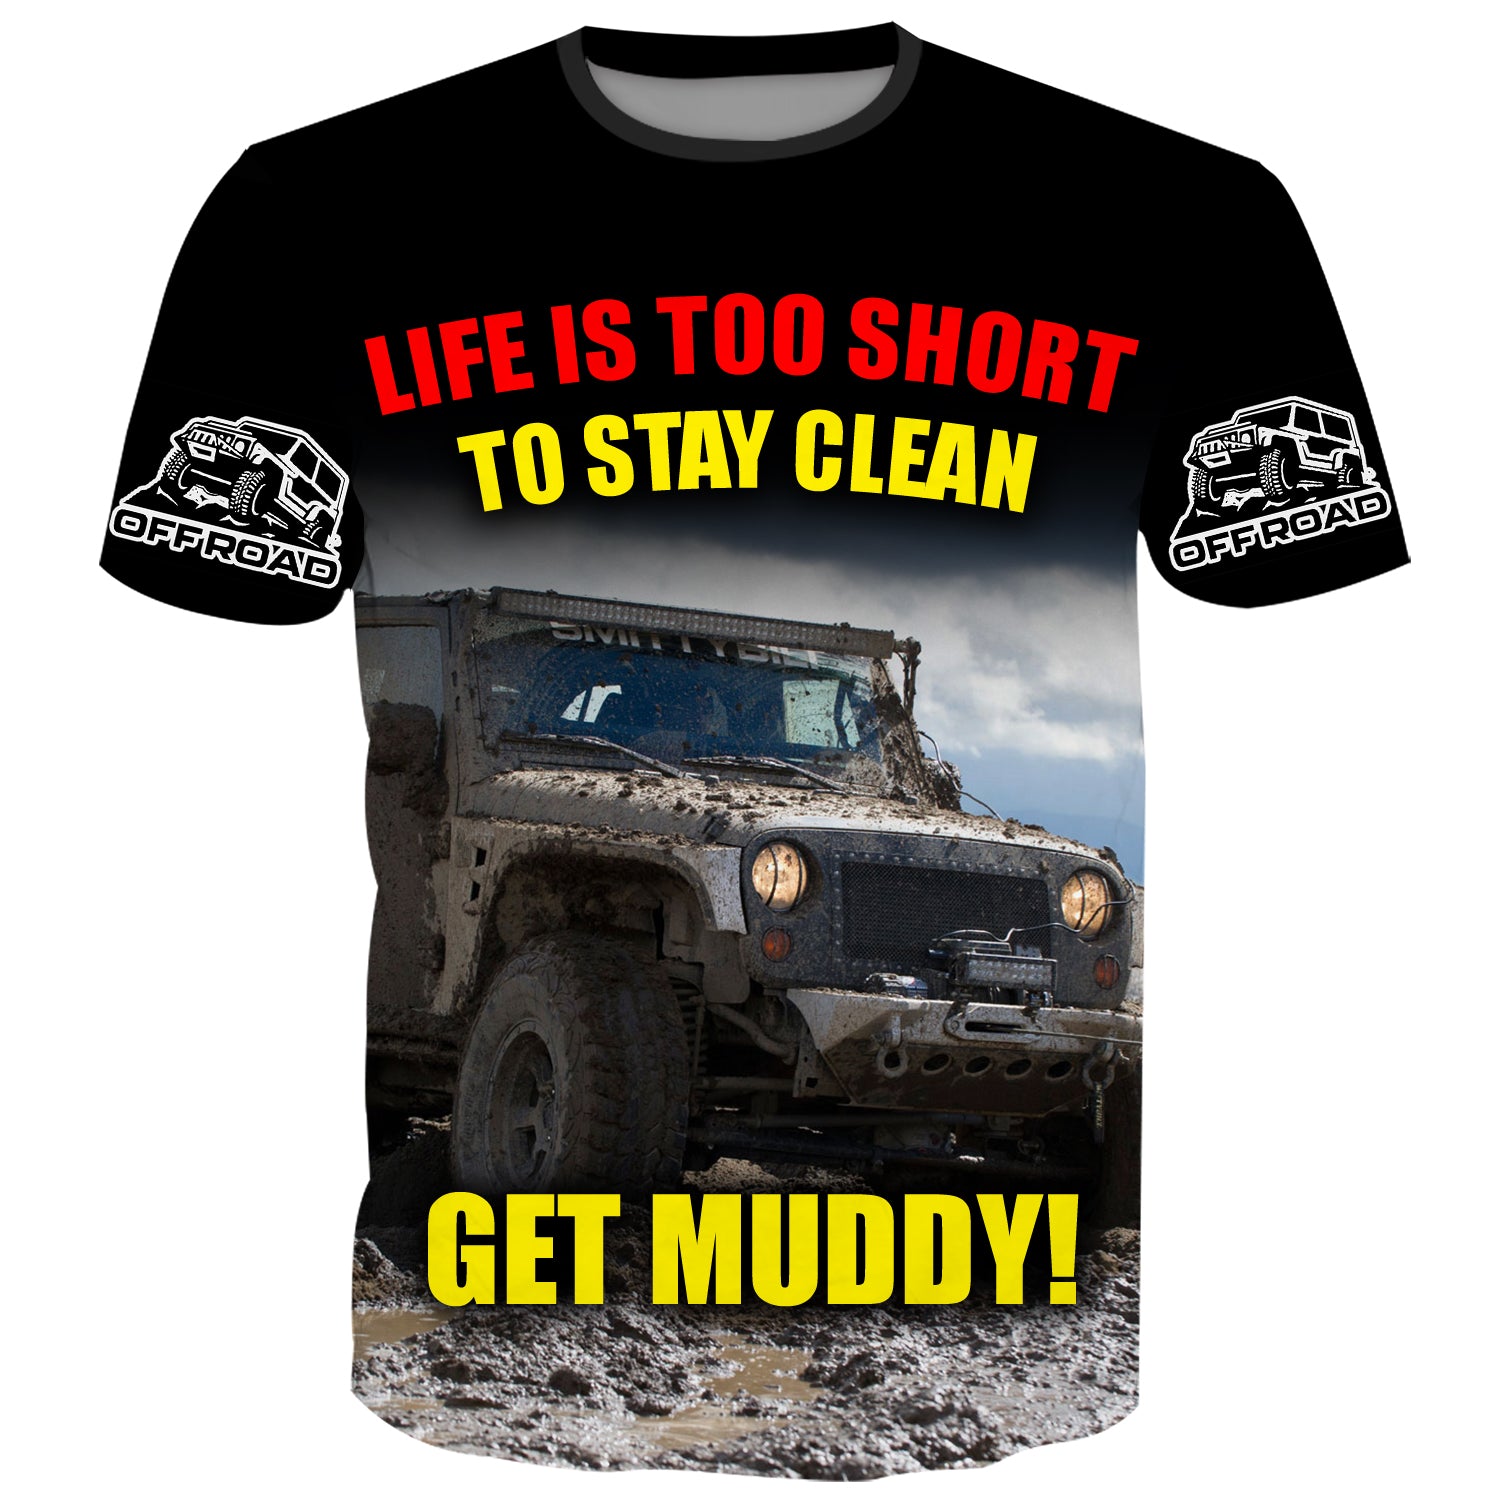 Life is too short to stay clean, Get Muddy! - T-Shirt